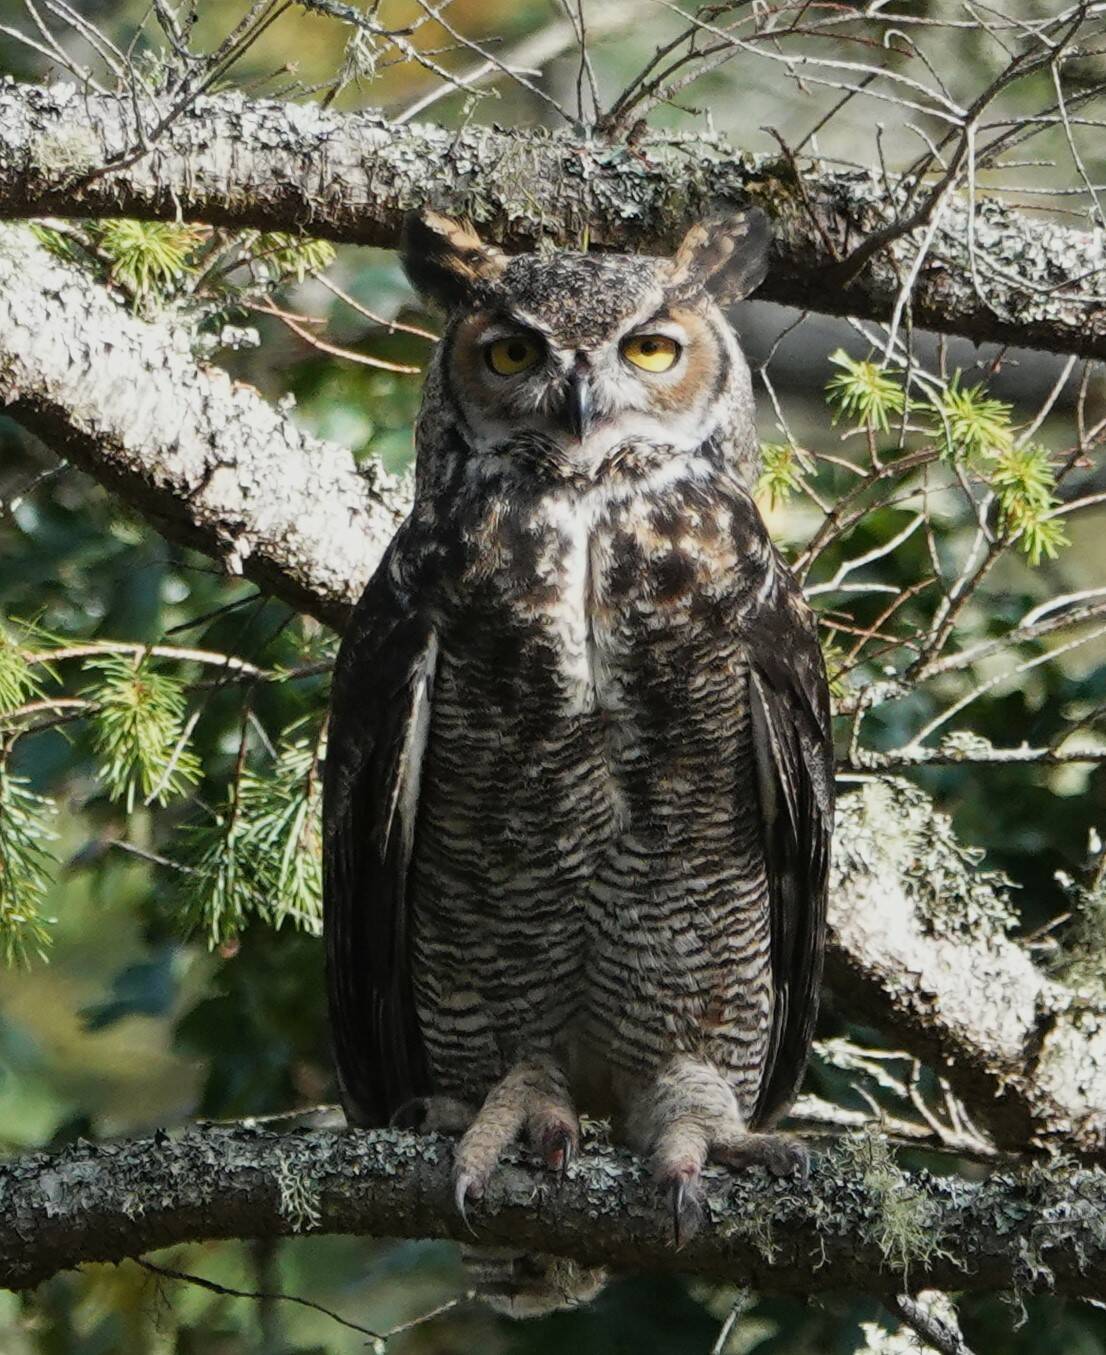 While unlikely, a great horned owl could carry off a big rabbit or a small cat, but could do serious damage in a failed attempt. (Photo by Ann Nightingale)